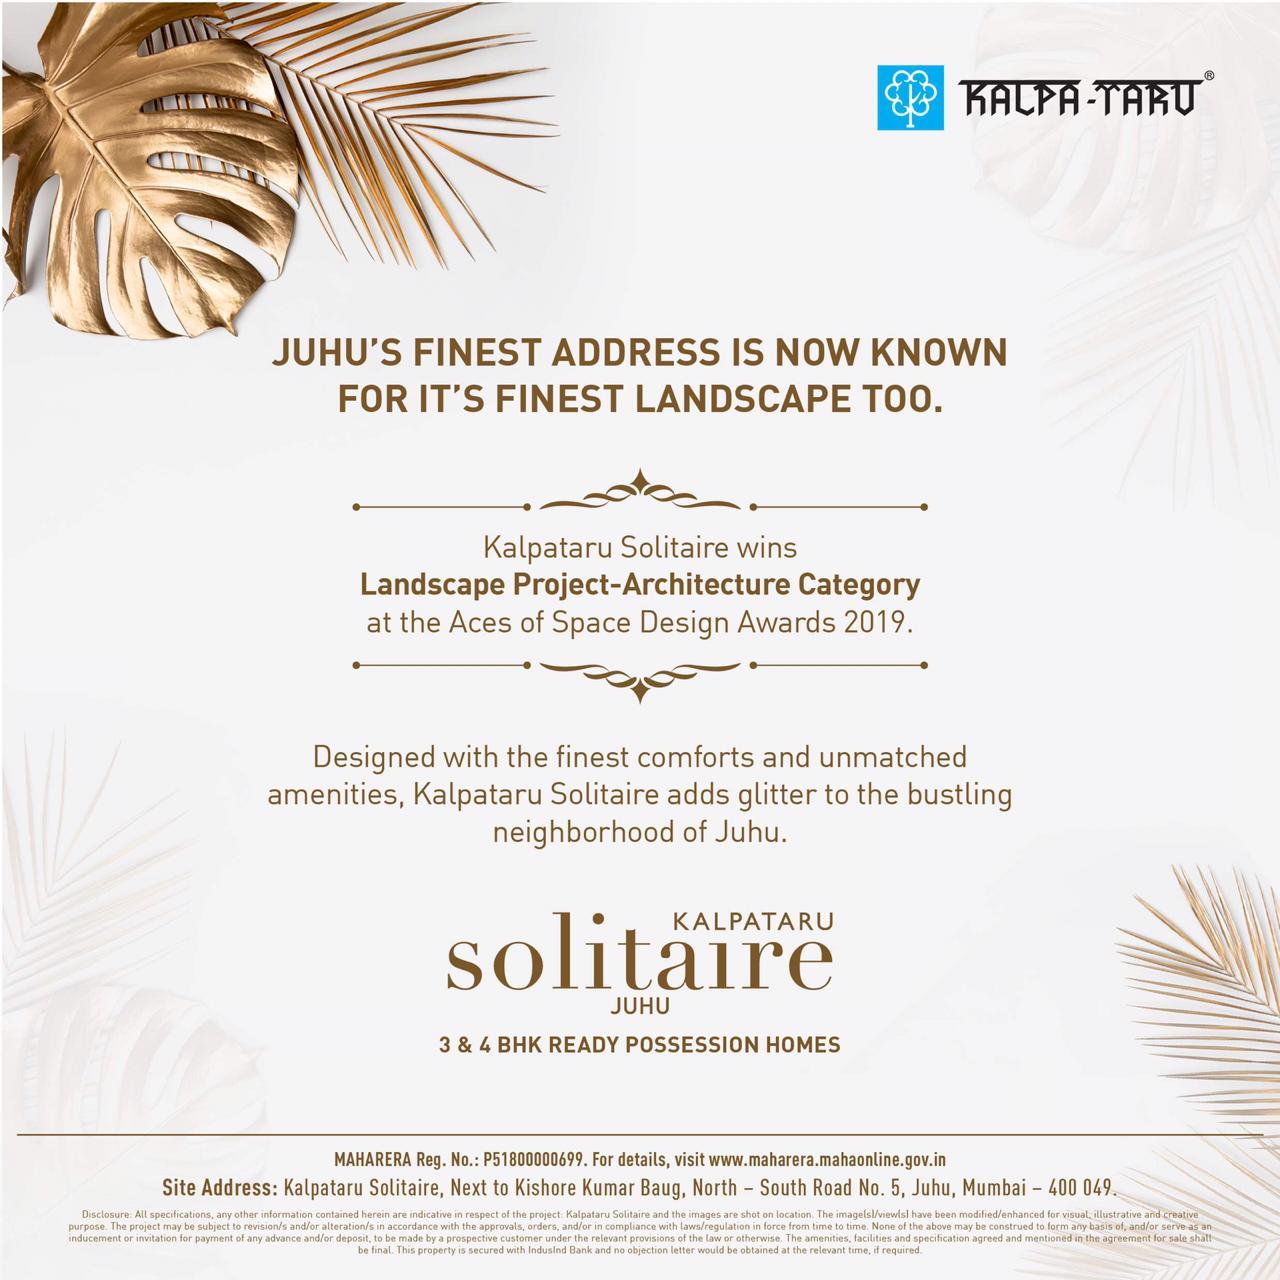 Kalpataru Solitaire wins landscape project-architecture category at the aces of space design awards 2019 Update